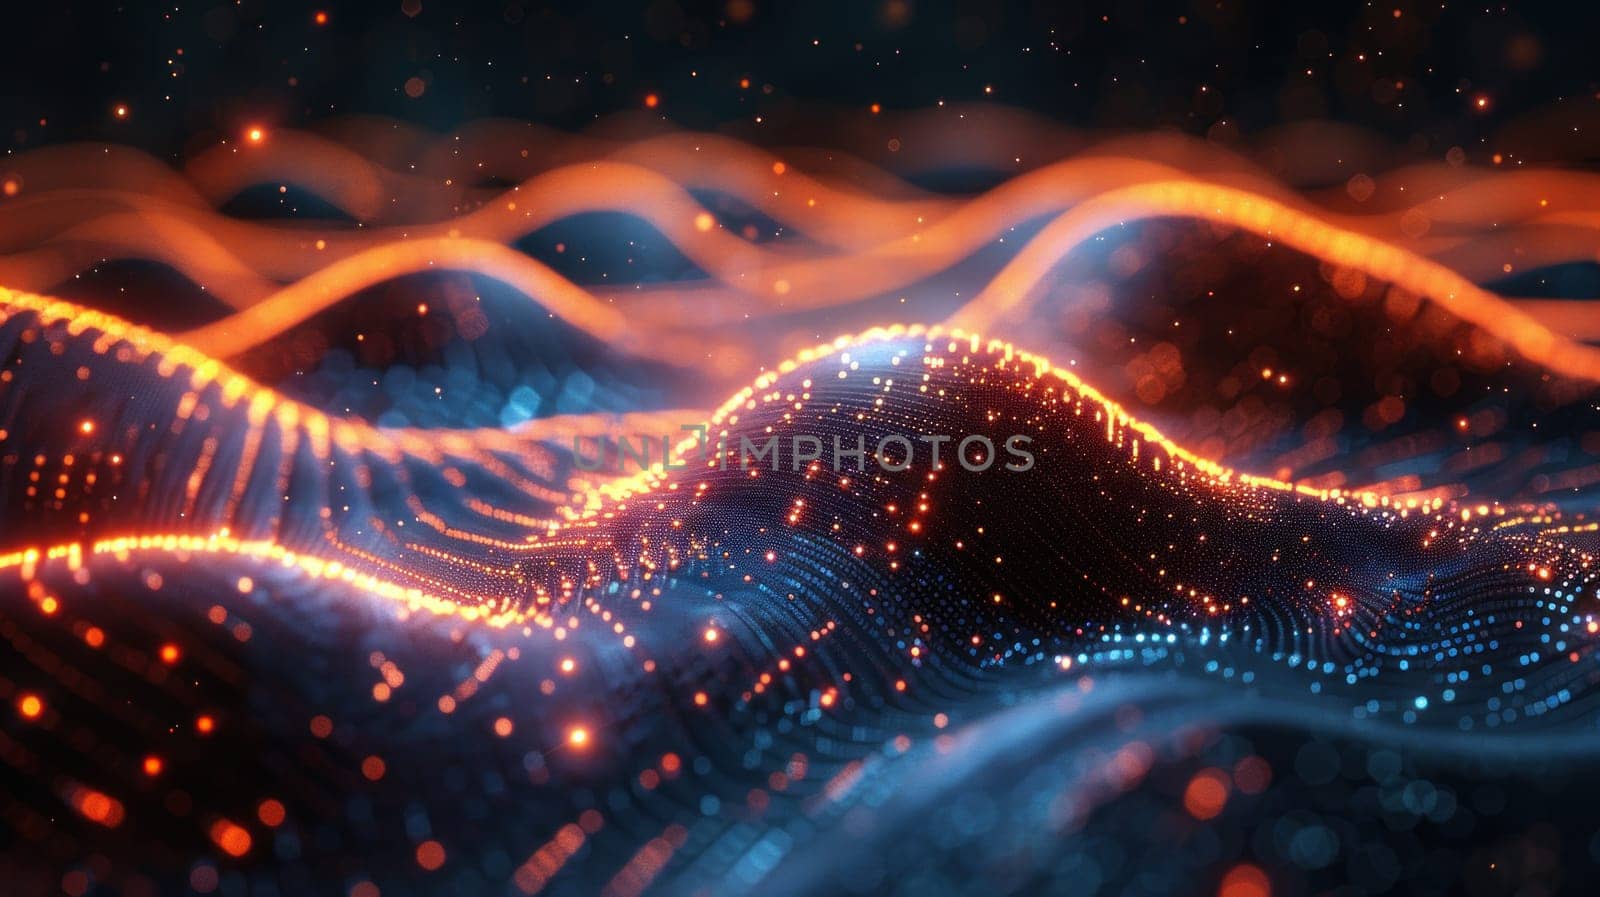 A series of orange and blue waves with a lot of sparkles.